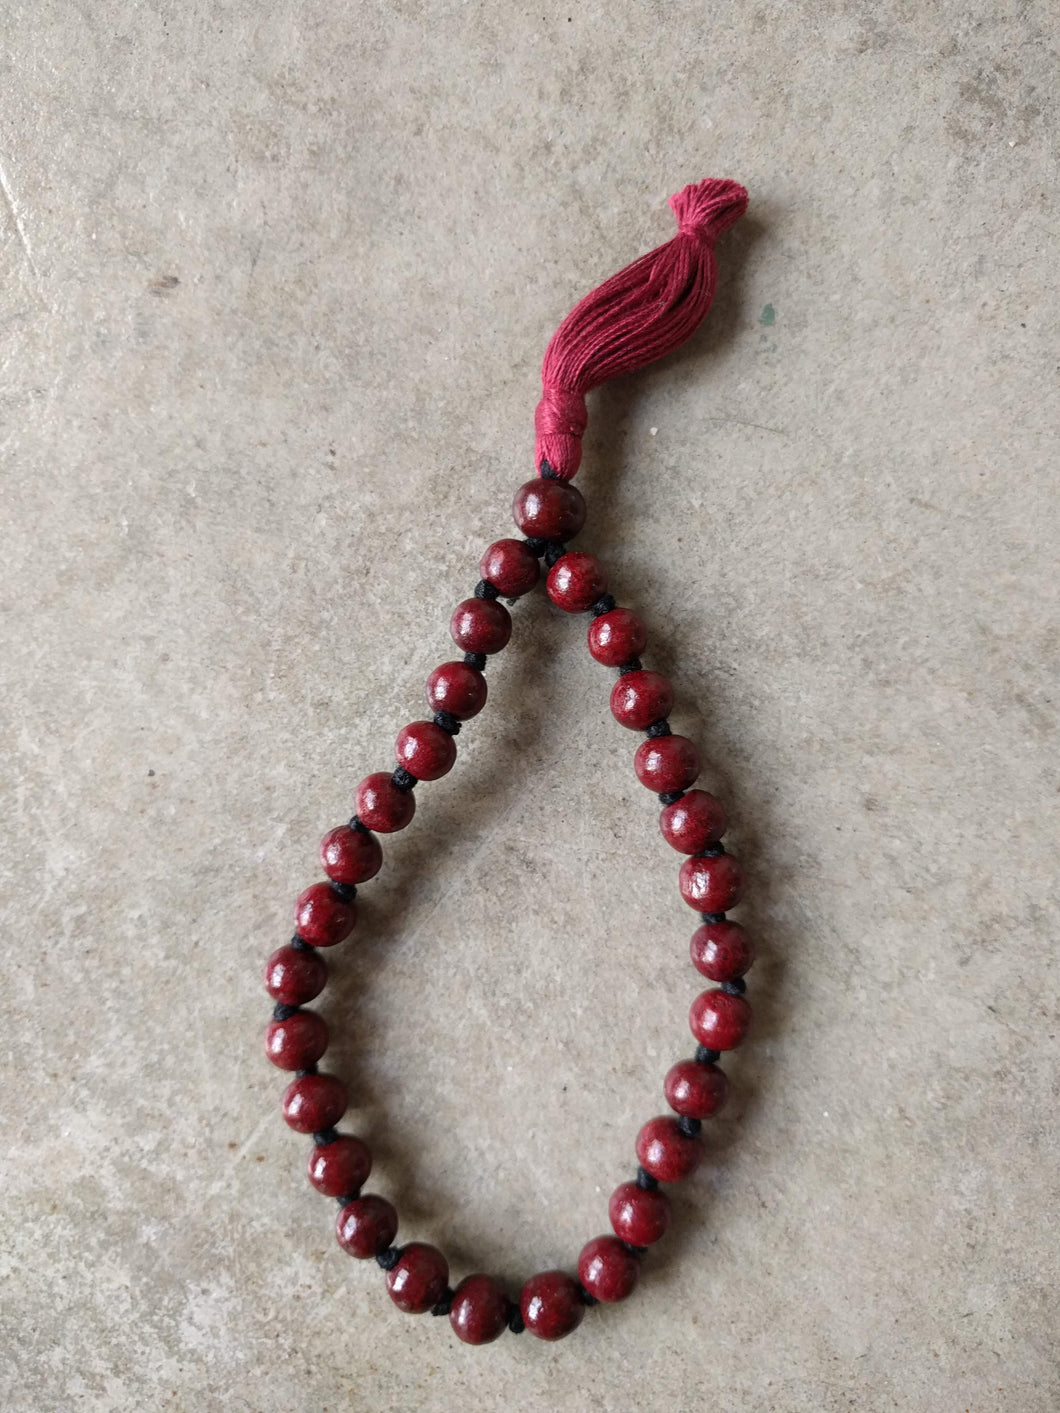 Rosewood 27 bead knotted